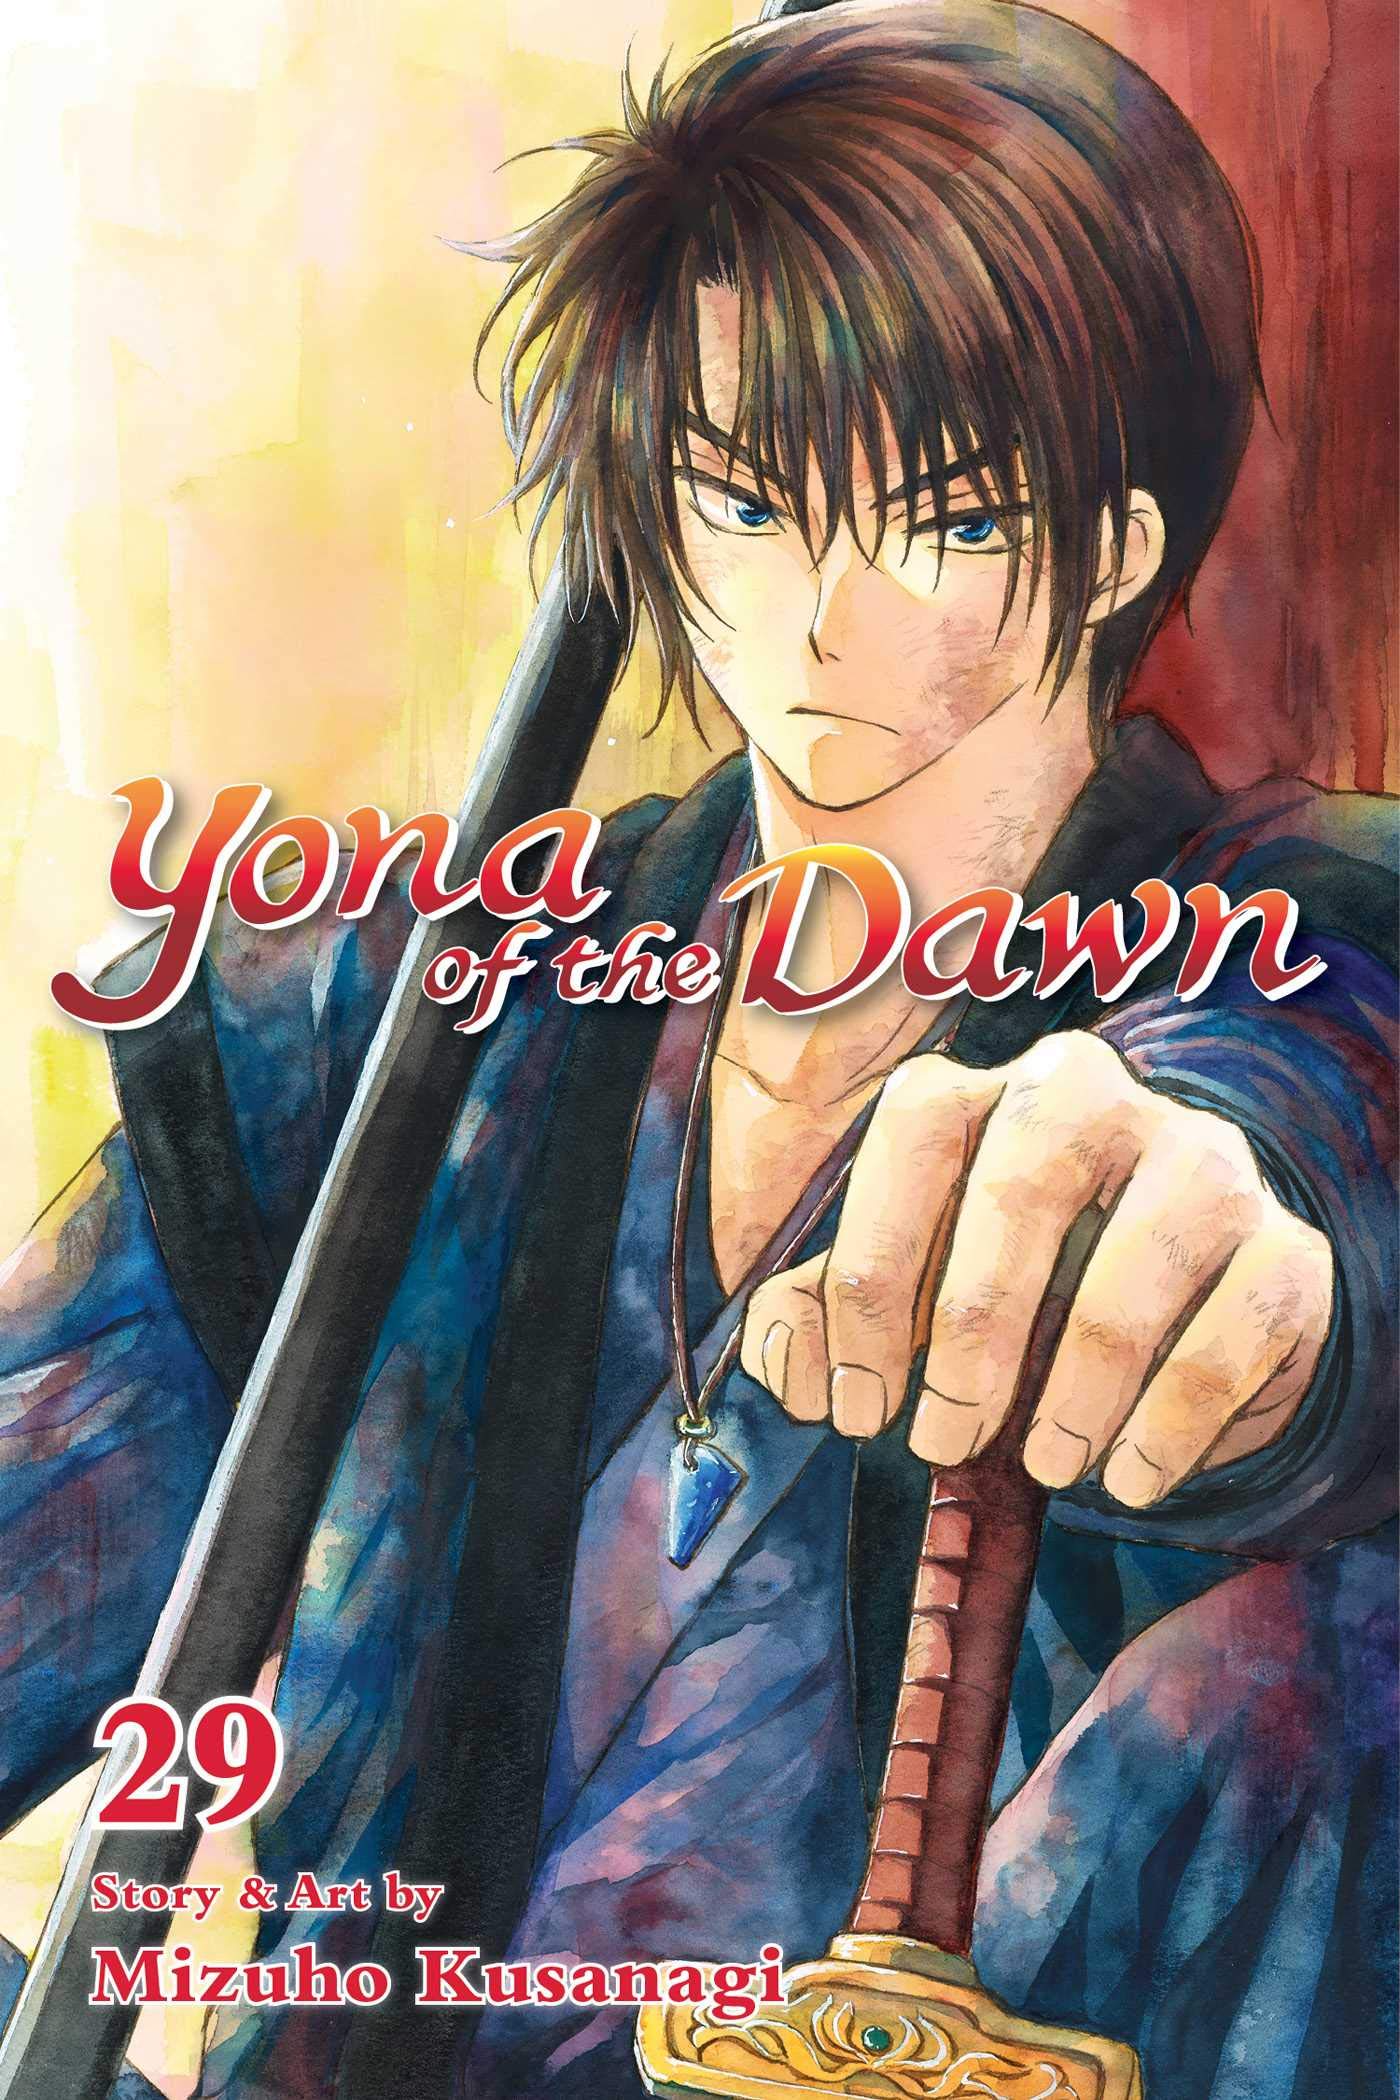 VIZ  The Official Website for Yona of the Dawn Manga